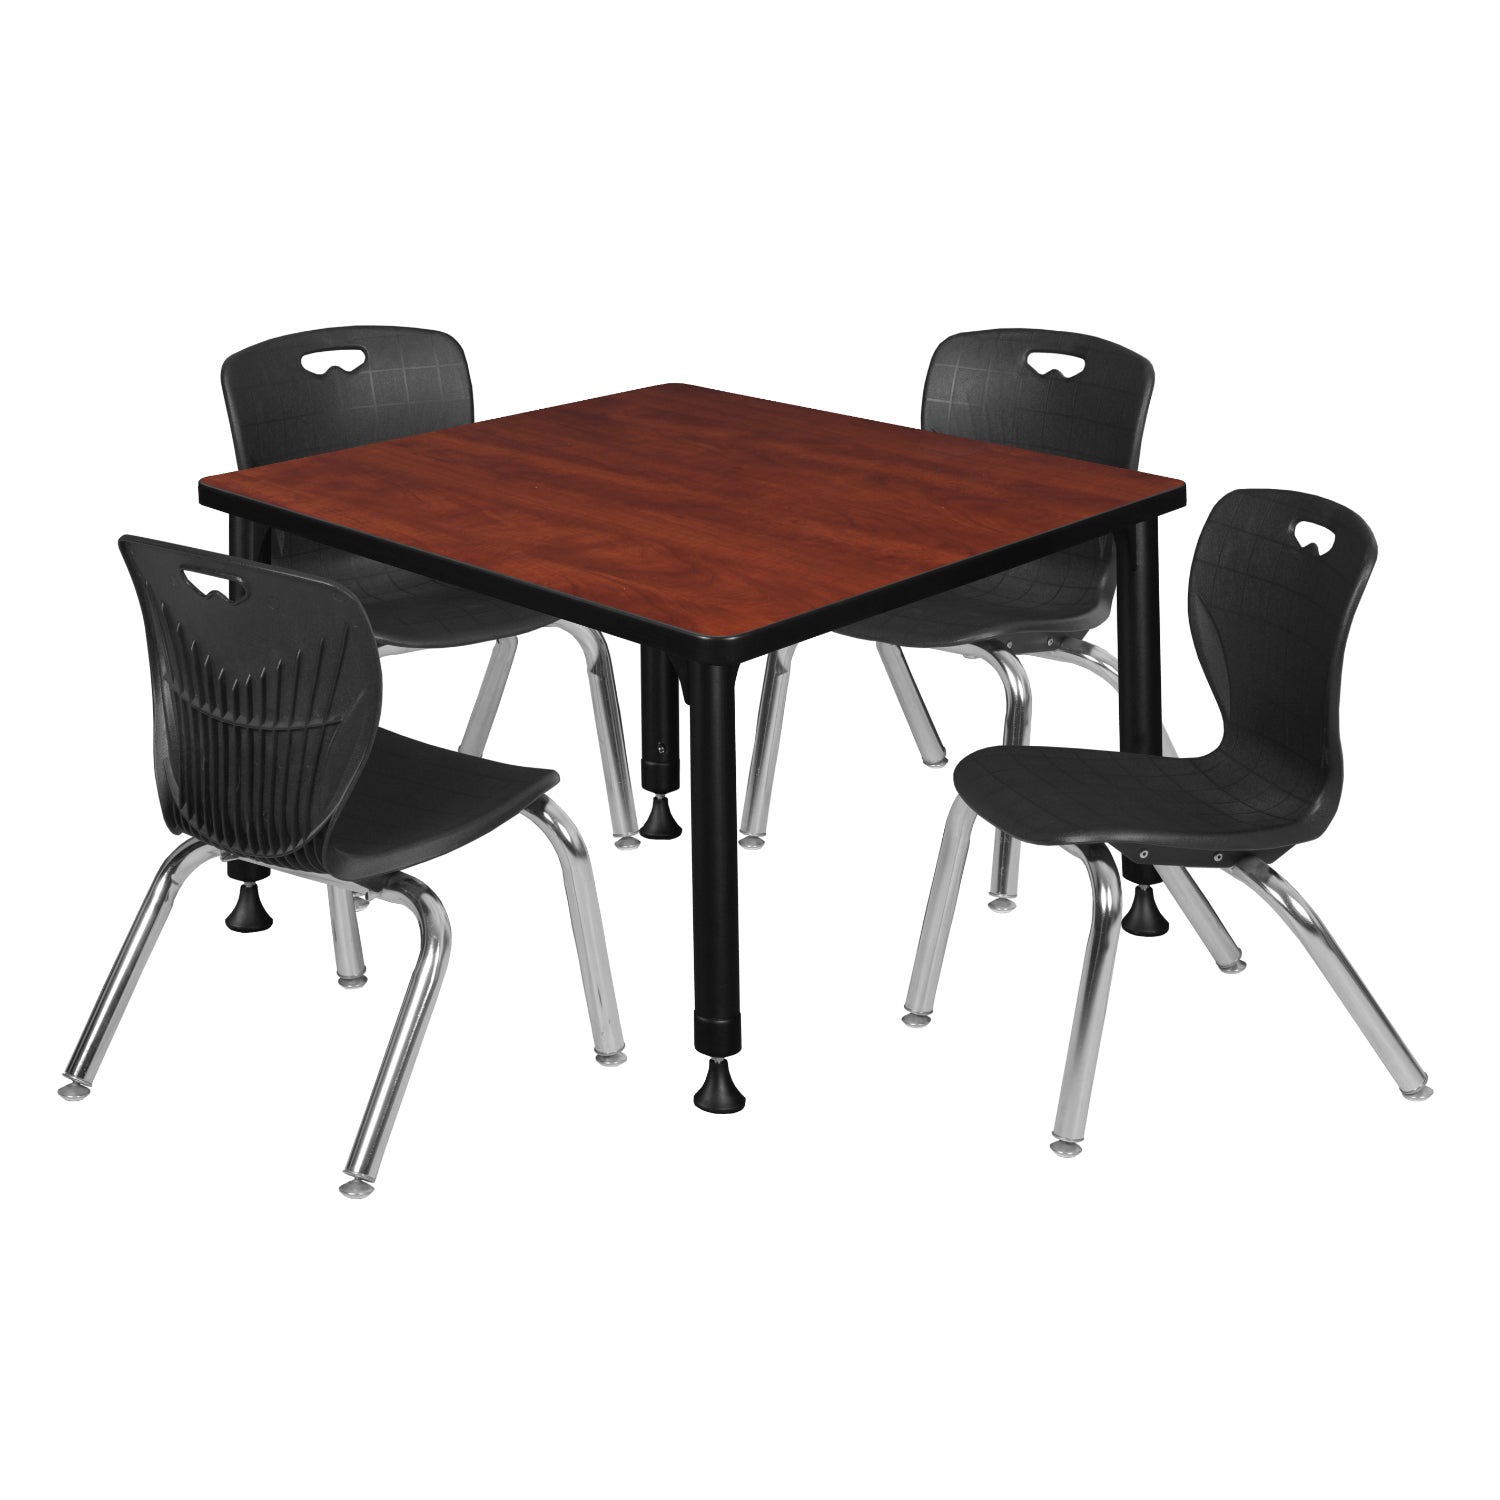 Kee Classroom Table and Chair Package, Kee 30" Square Adjustable Height Table with 4 Andy 12" Stack Chairs